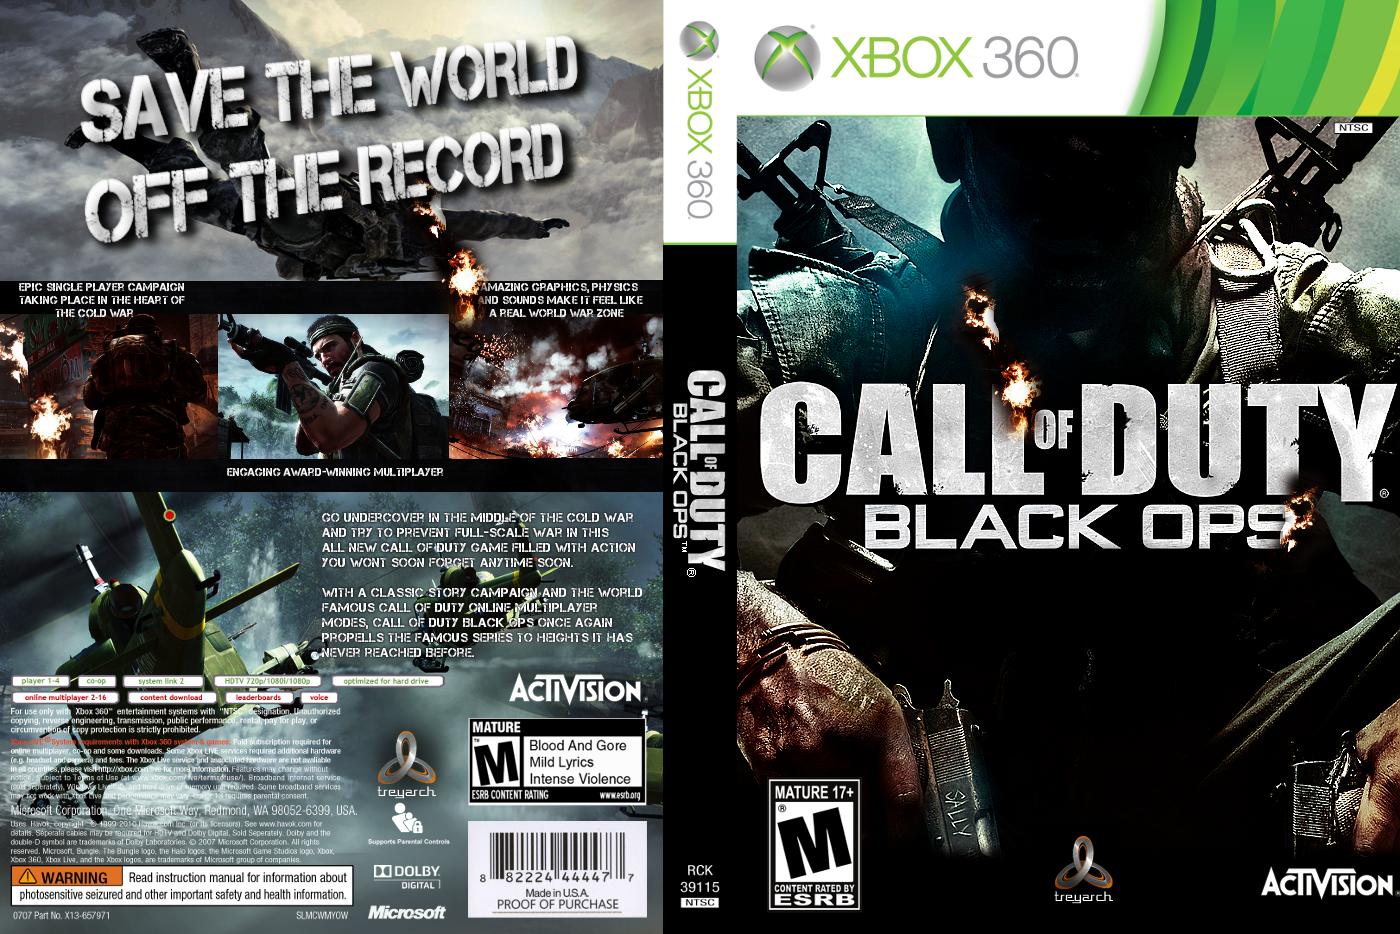 Game Torrent 3.0: Call Of Duty Black Ops(xbox 360) Regiao Free